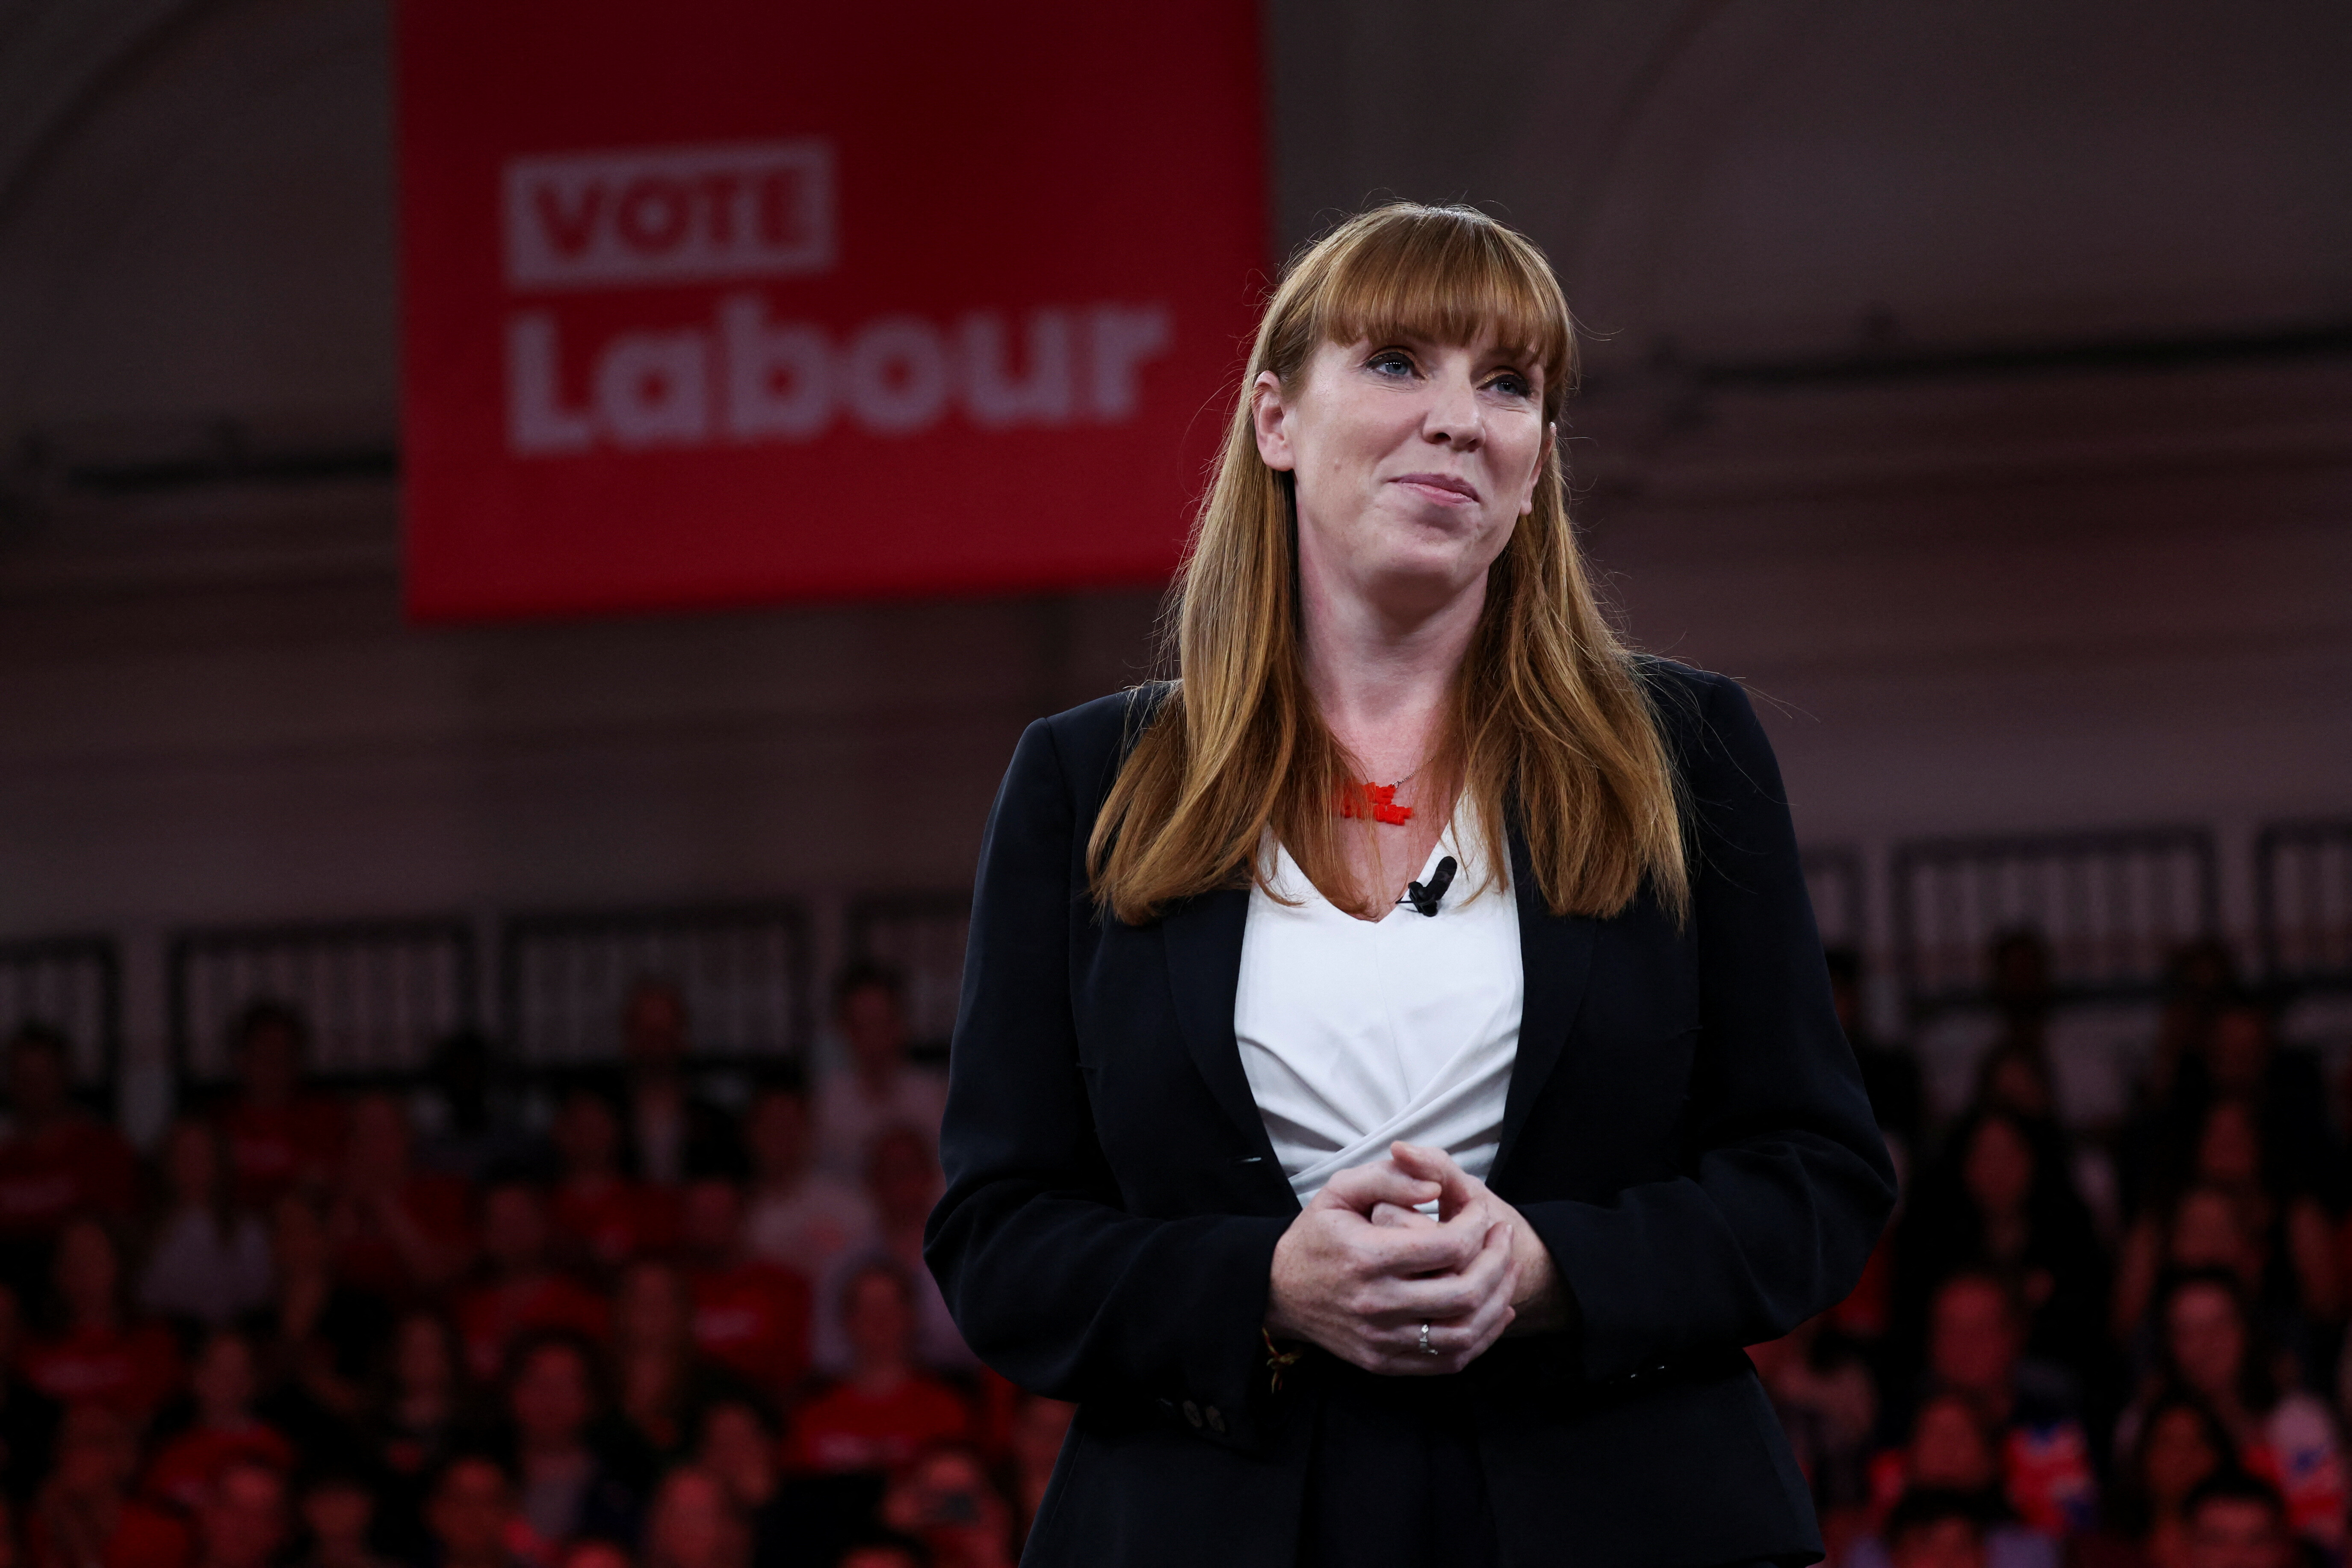 Angela Rayner says Labour government would require U.K. boroughs to take 'fair share' of asylum seekers - but distribution policy already exists